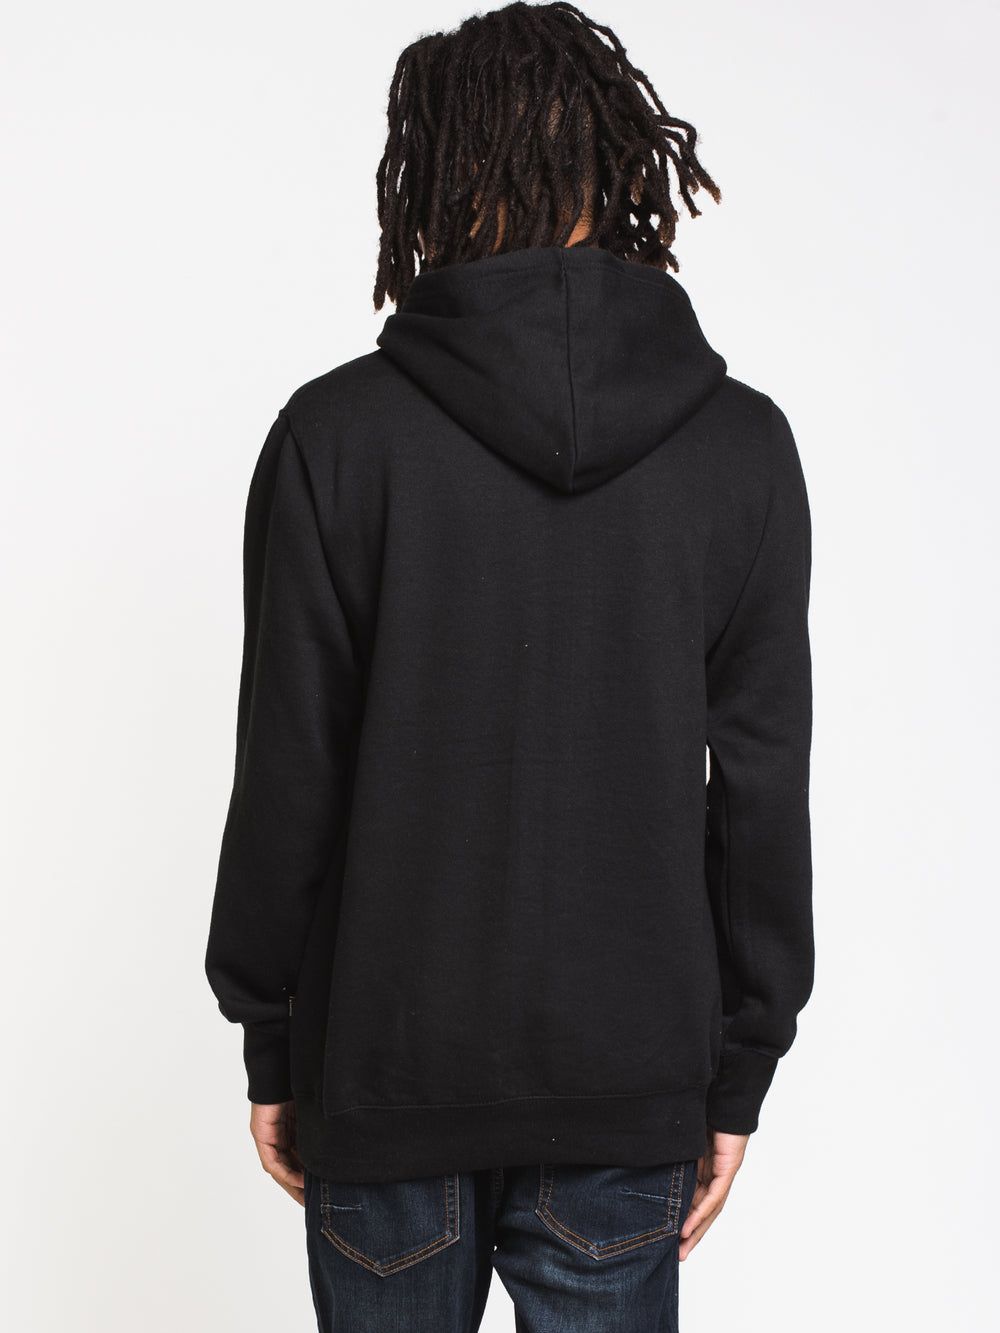 CROOKS & CASTLES OG CORE LOGO EMBROIDERED PULLOVER HOODIE - CLEARANCE